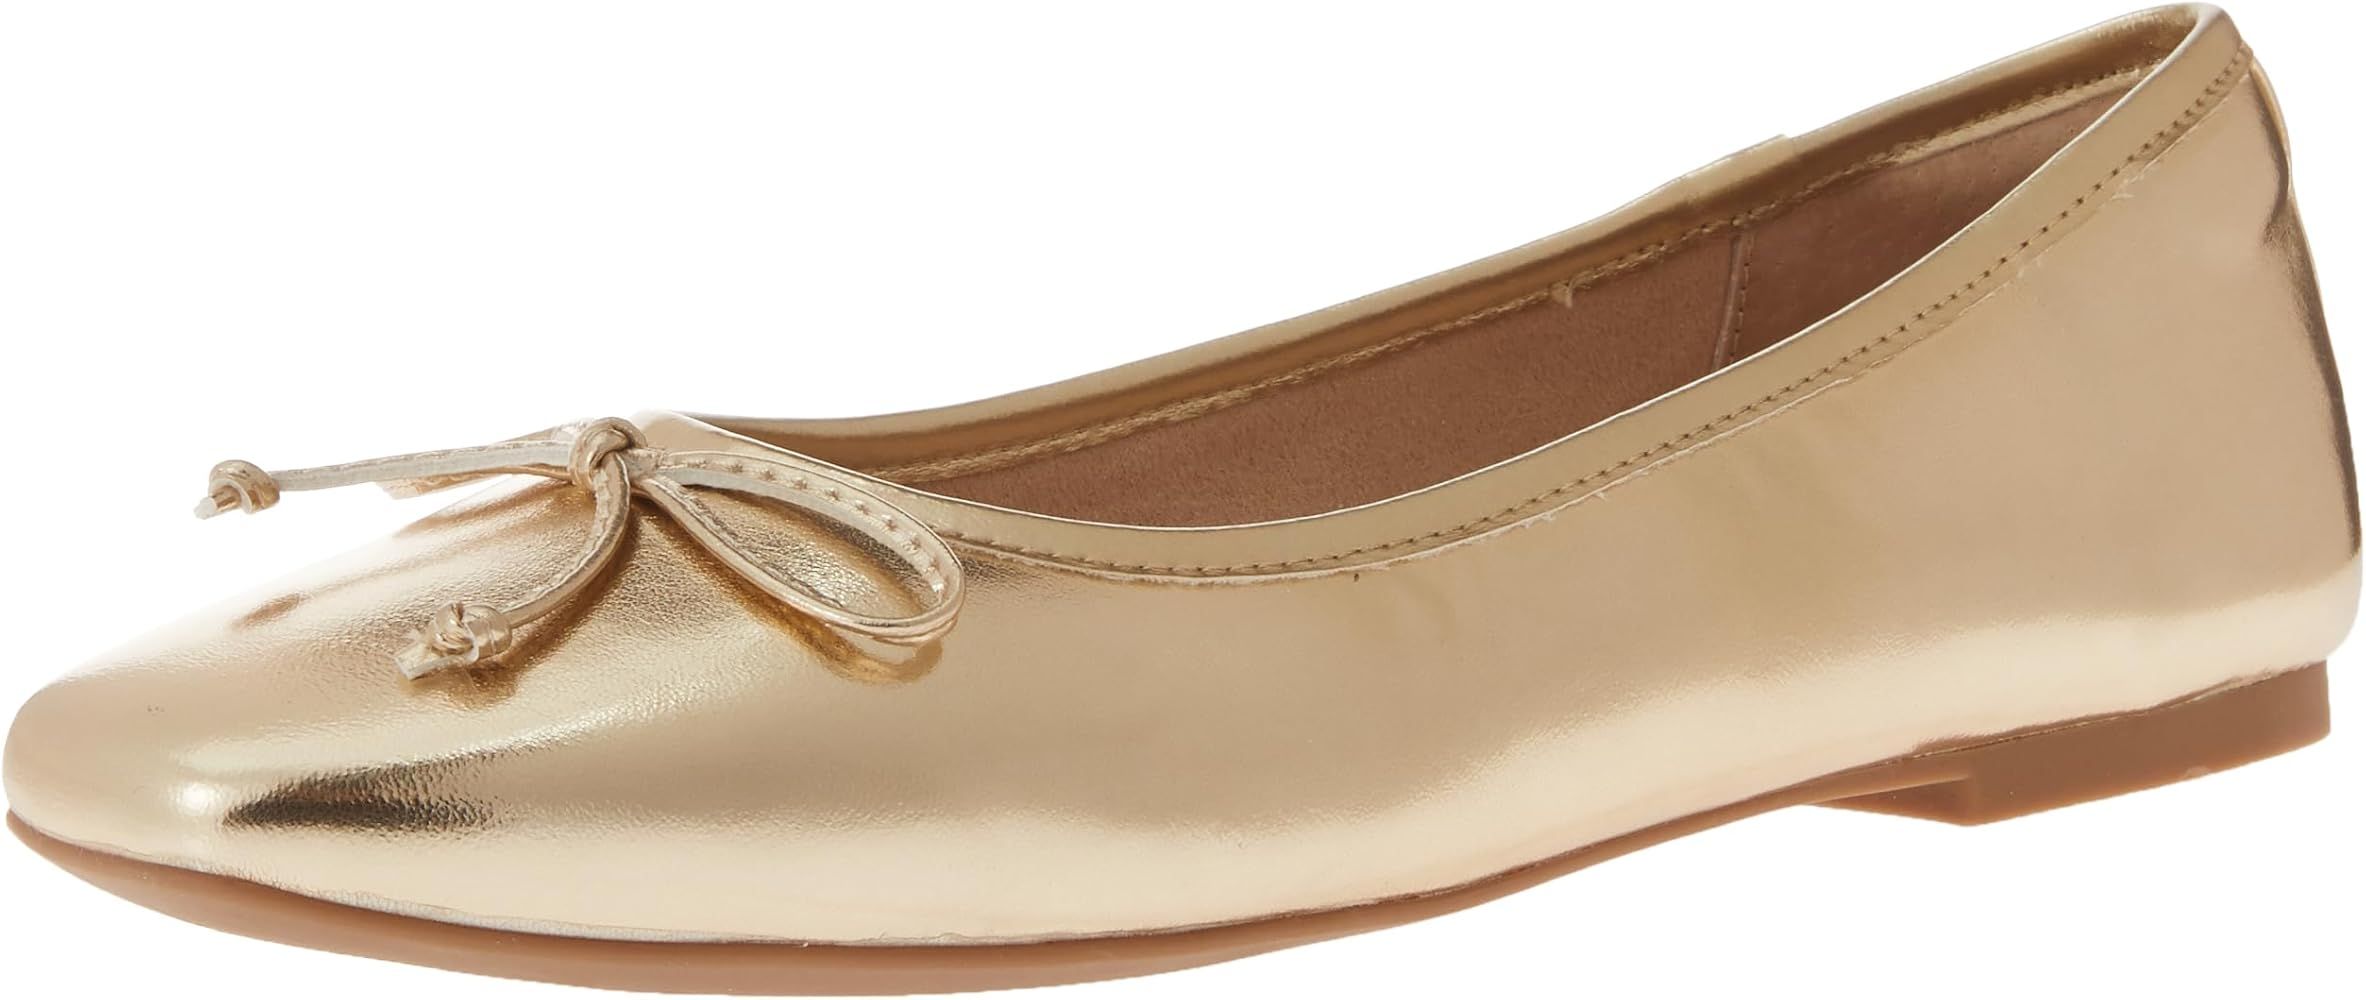 Women's Pepper Ballet Flat with Bow | Amazon (US)